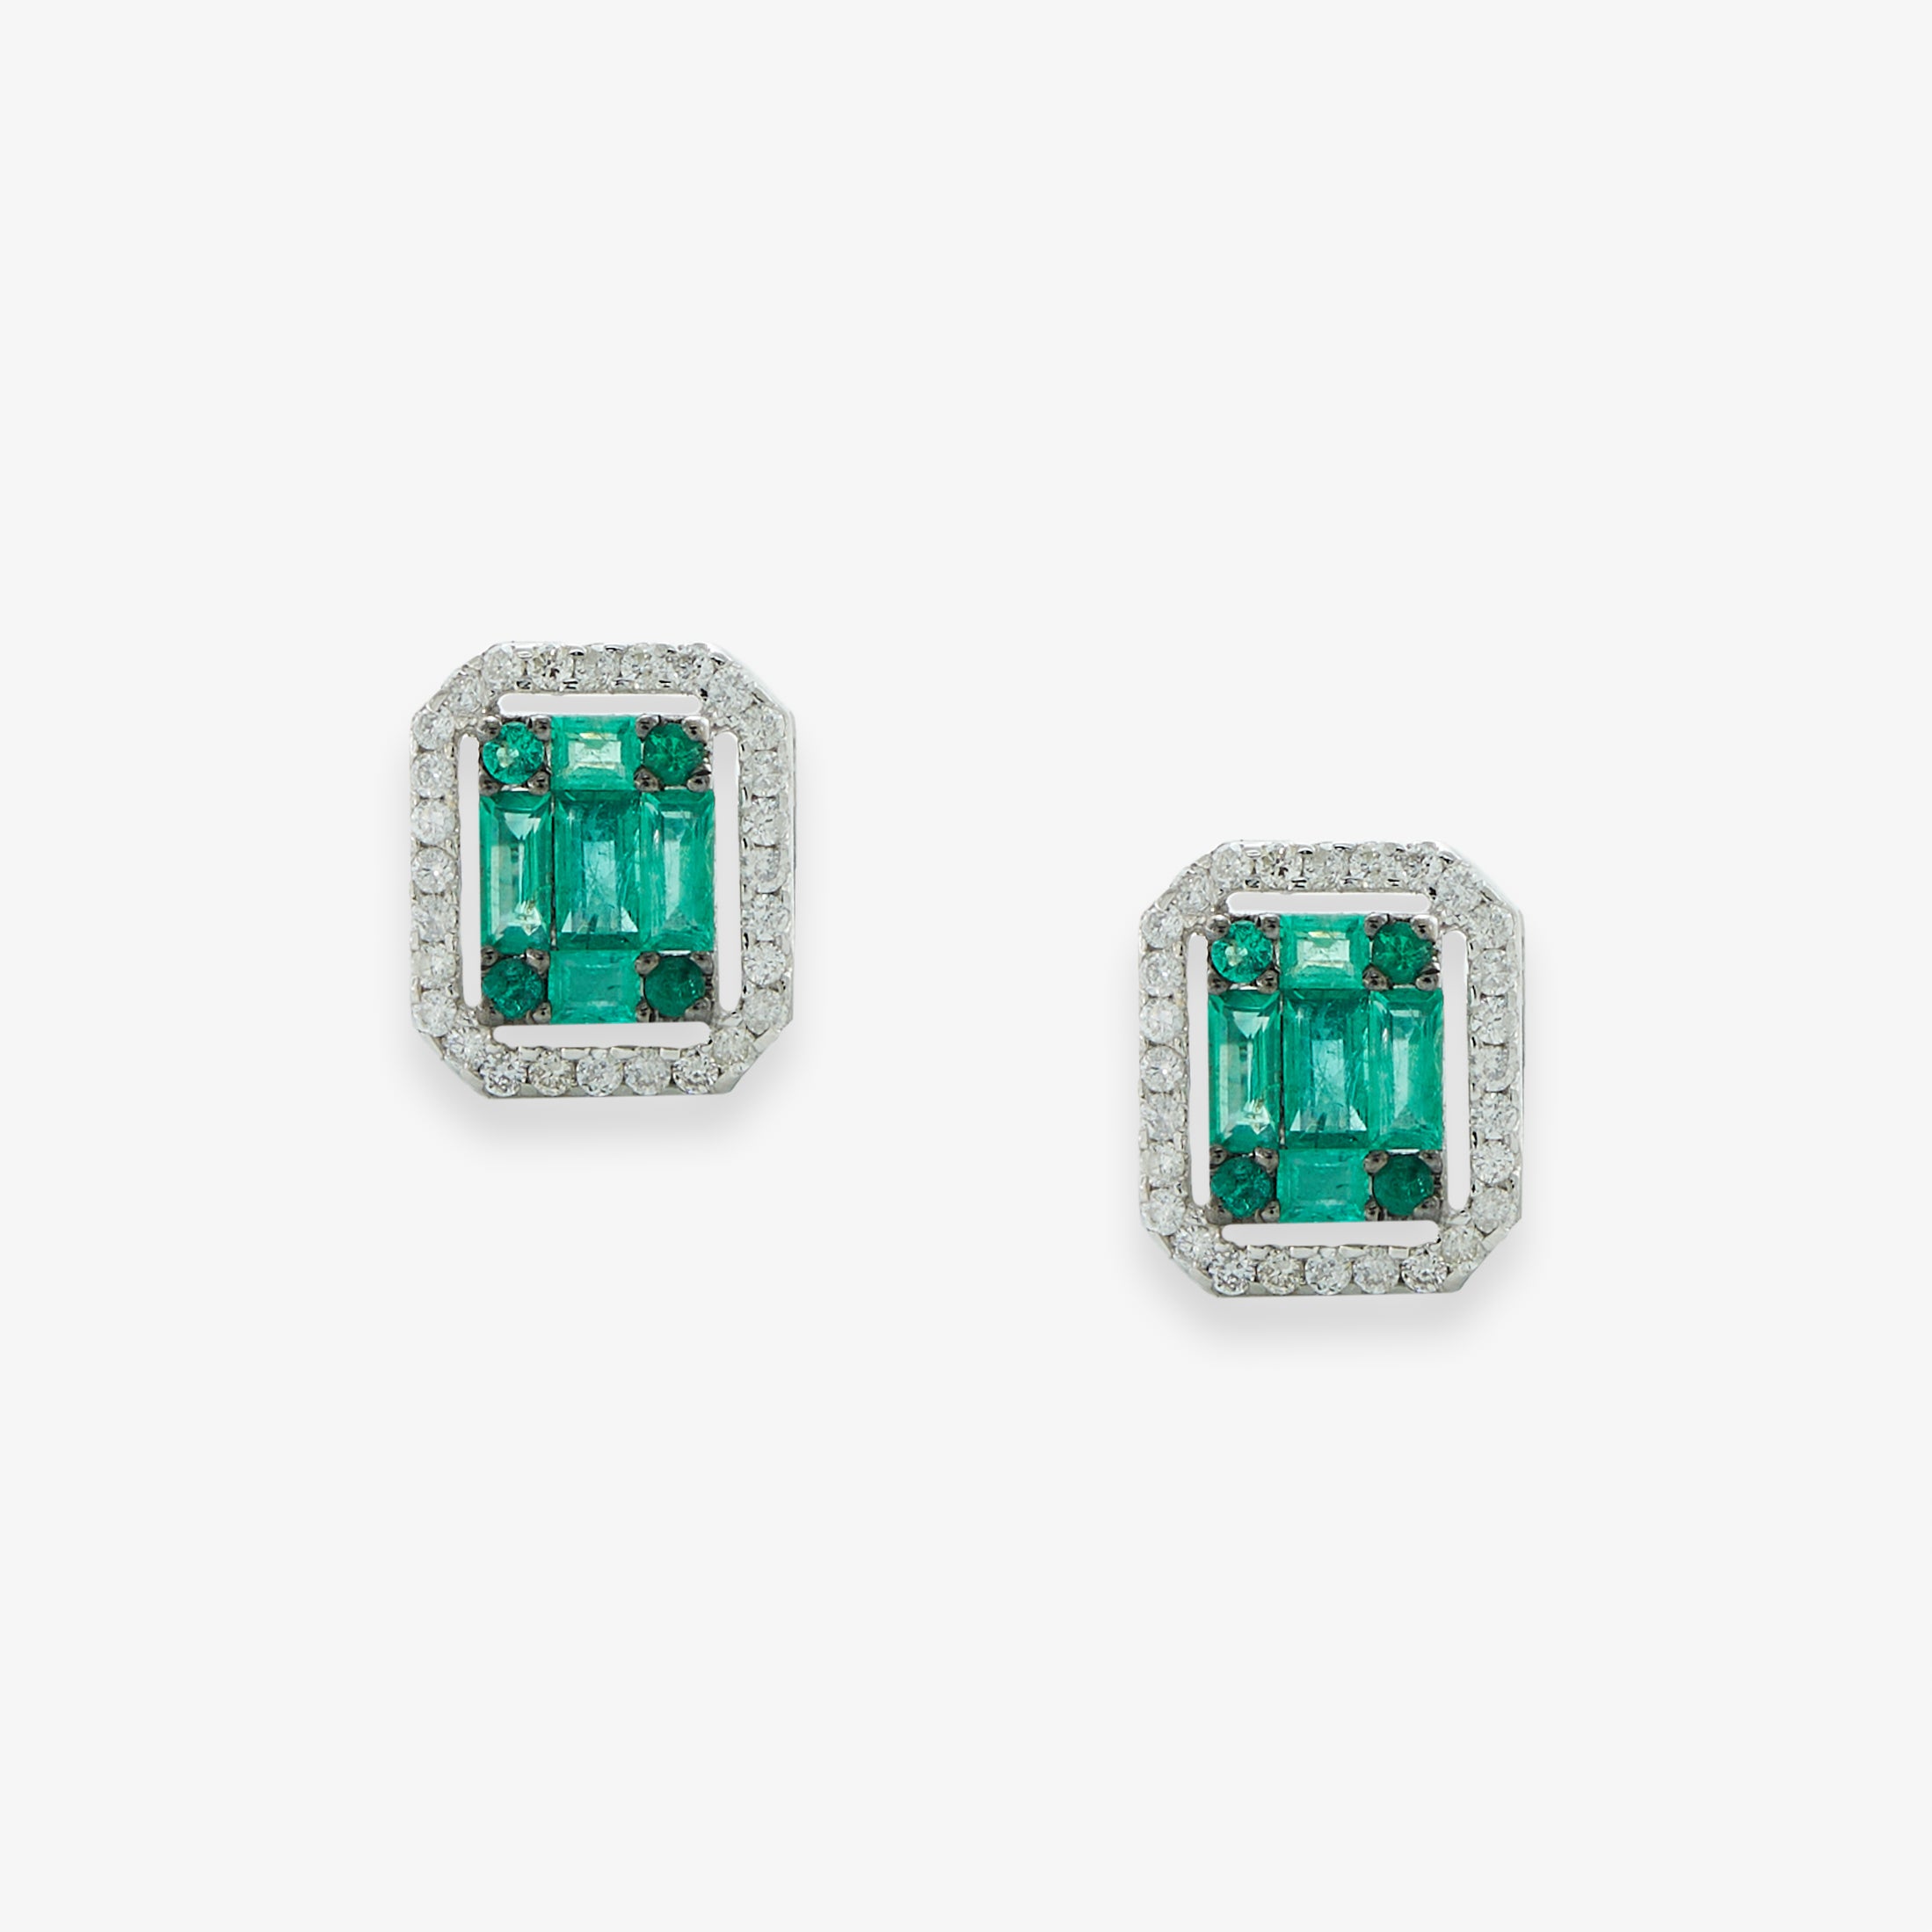 MORNA EARRINGS WITH EMERALDS AND DIAMONDS